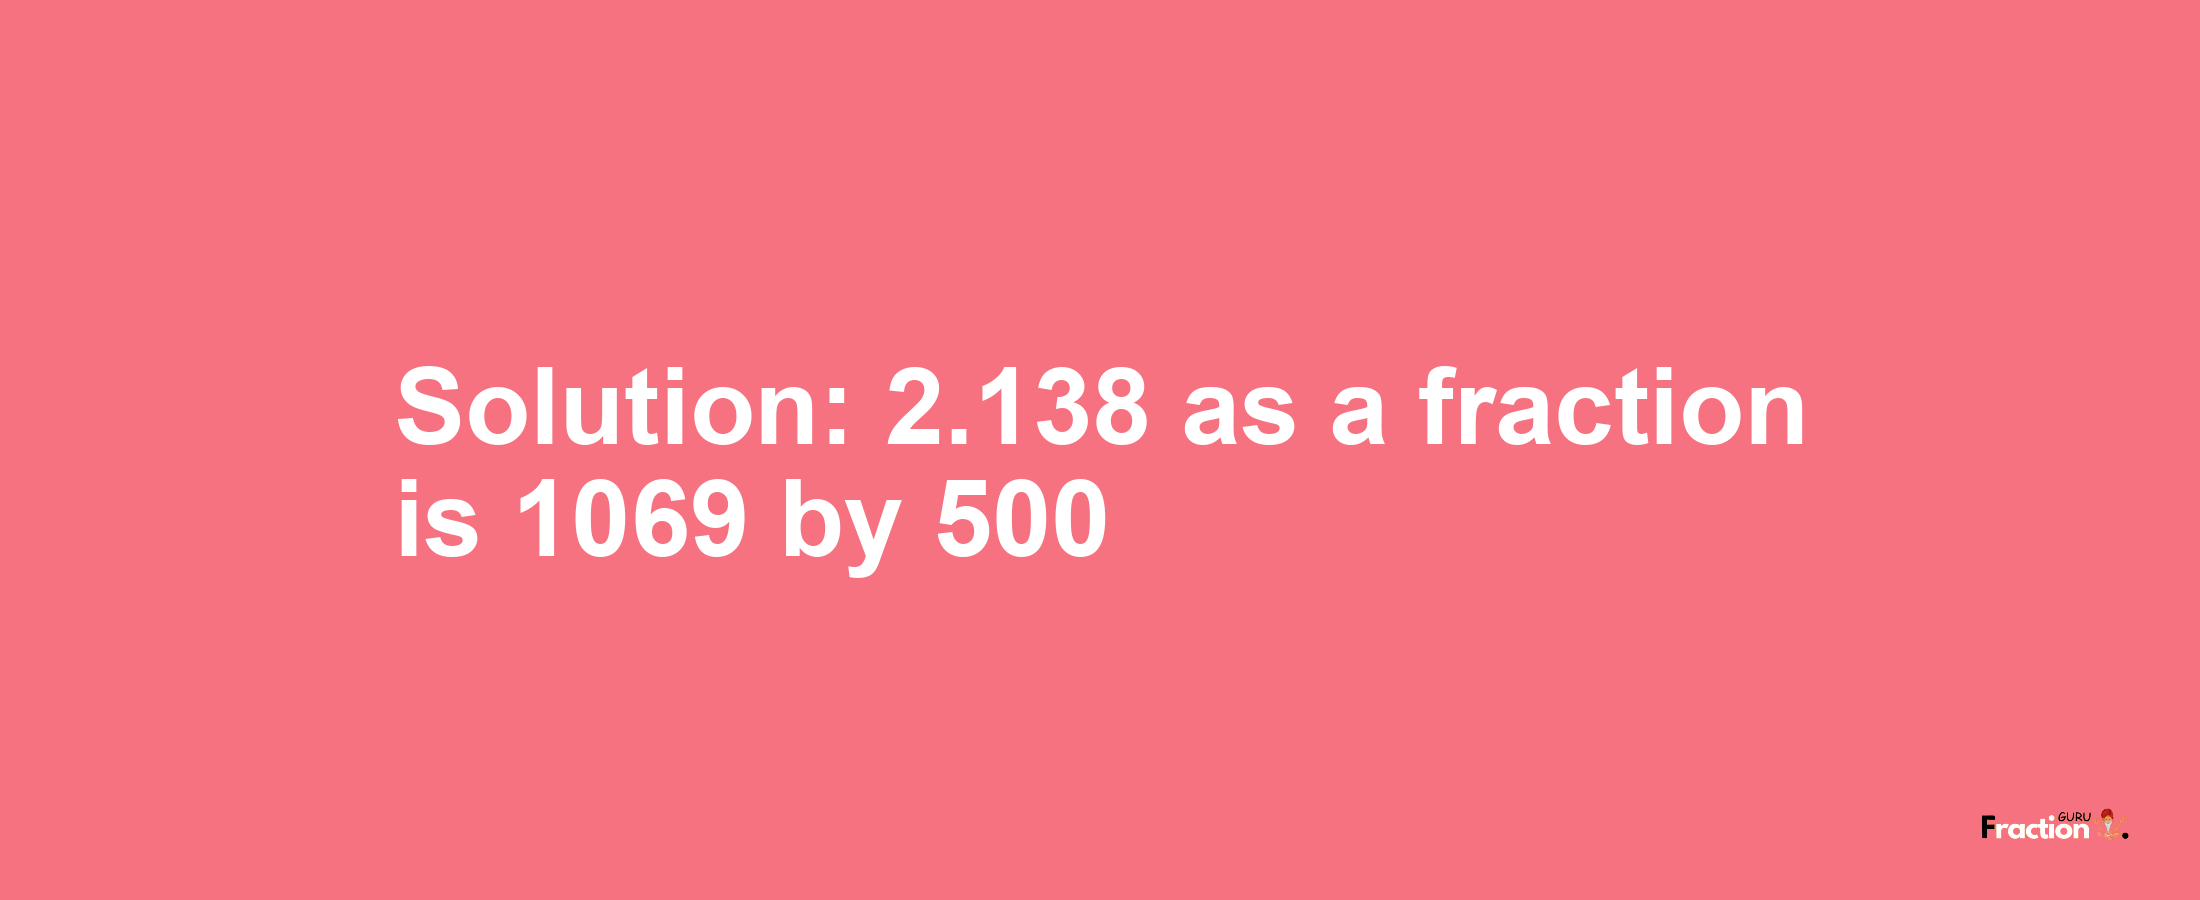 Solution:2.138 as a fraction is 1069/500